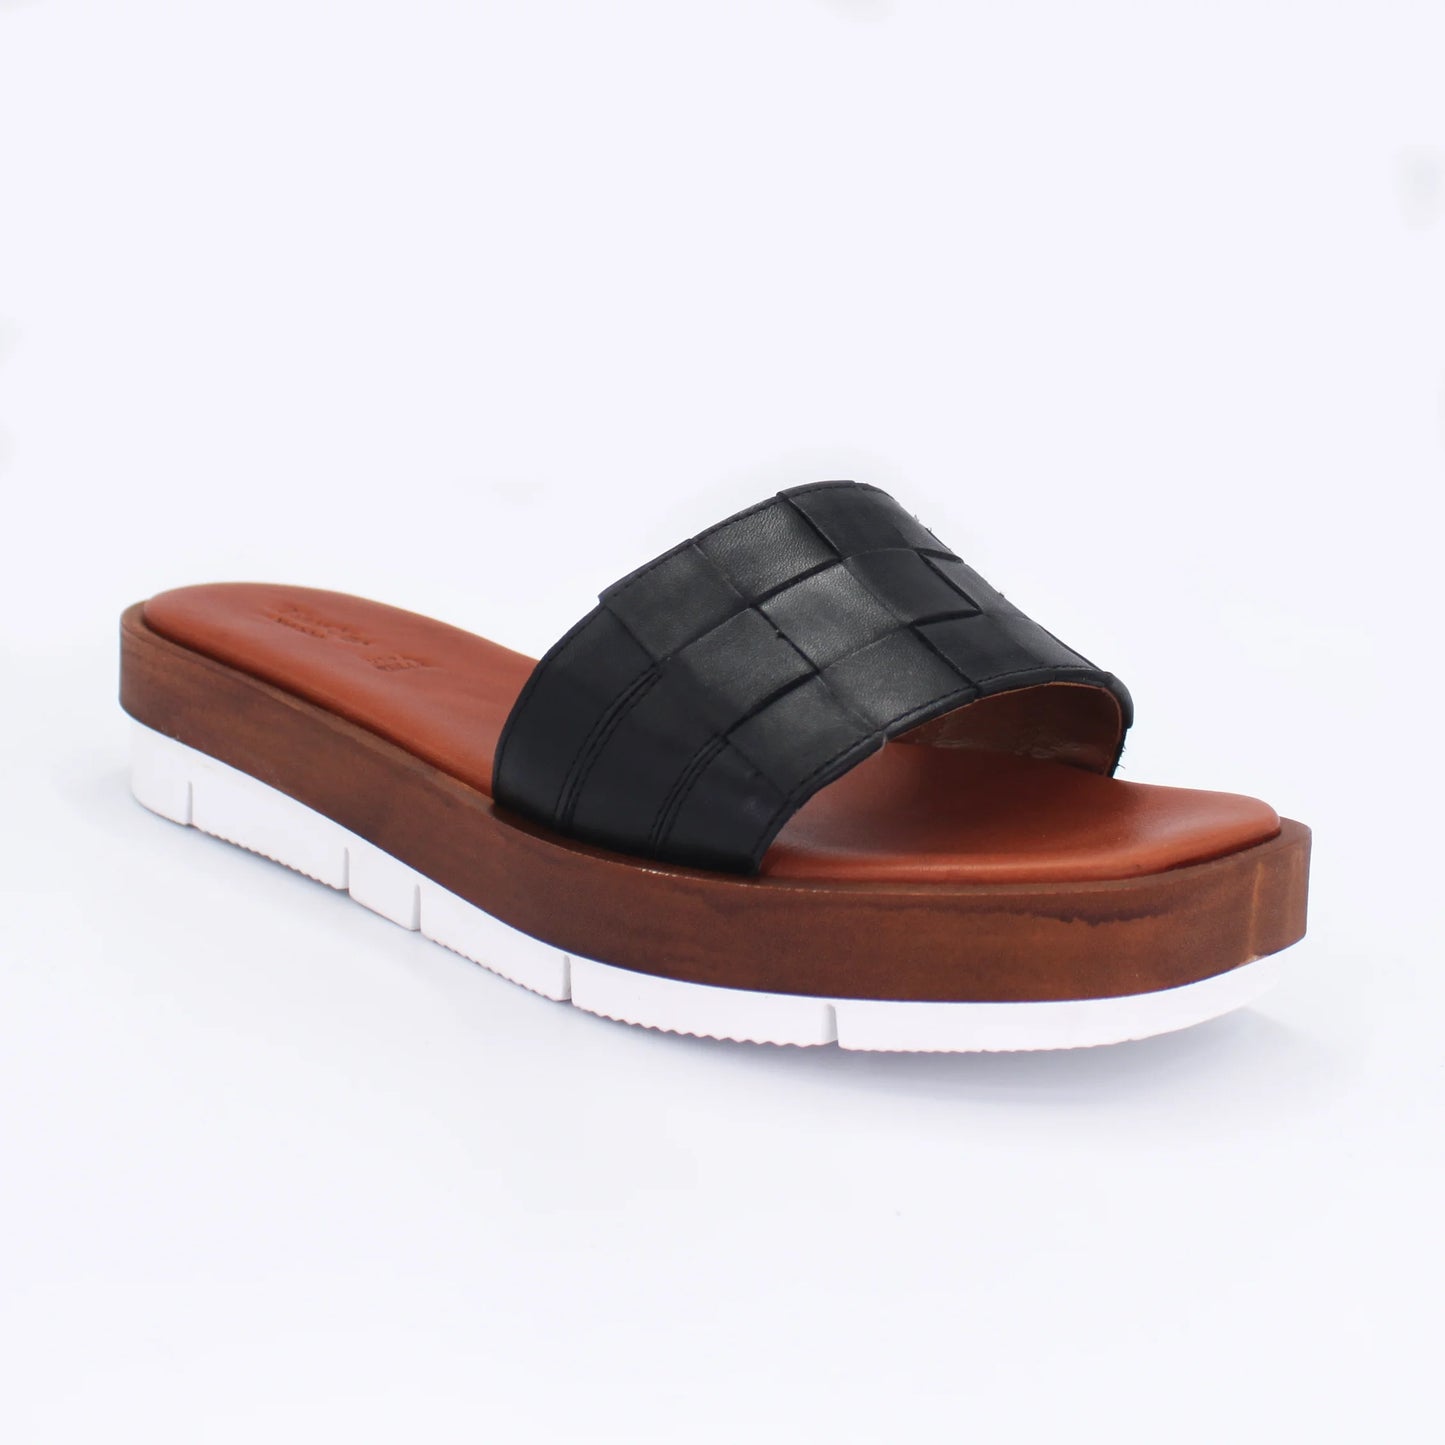 Shop Handmade Italian Leather Sandal in Nero Black (2150) or browse our range of hand-made Italian sandals for women in leather or suede in-store at Aliverti Durban or Cape Town, or shop online. We deliver in South Africa & offer multiple payment plans as well as accept multiple safe & secure payment methods.